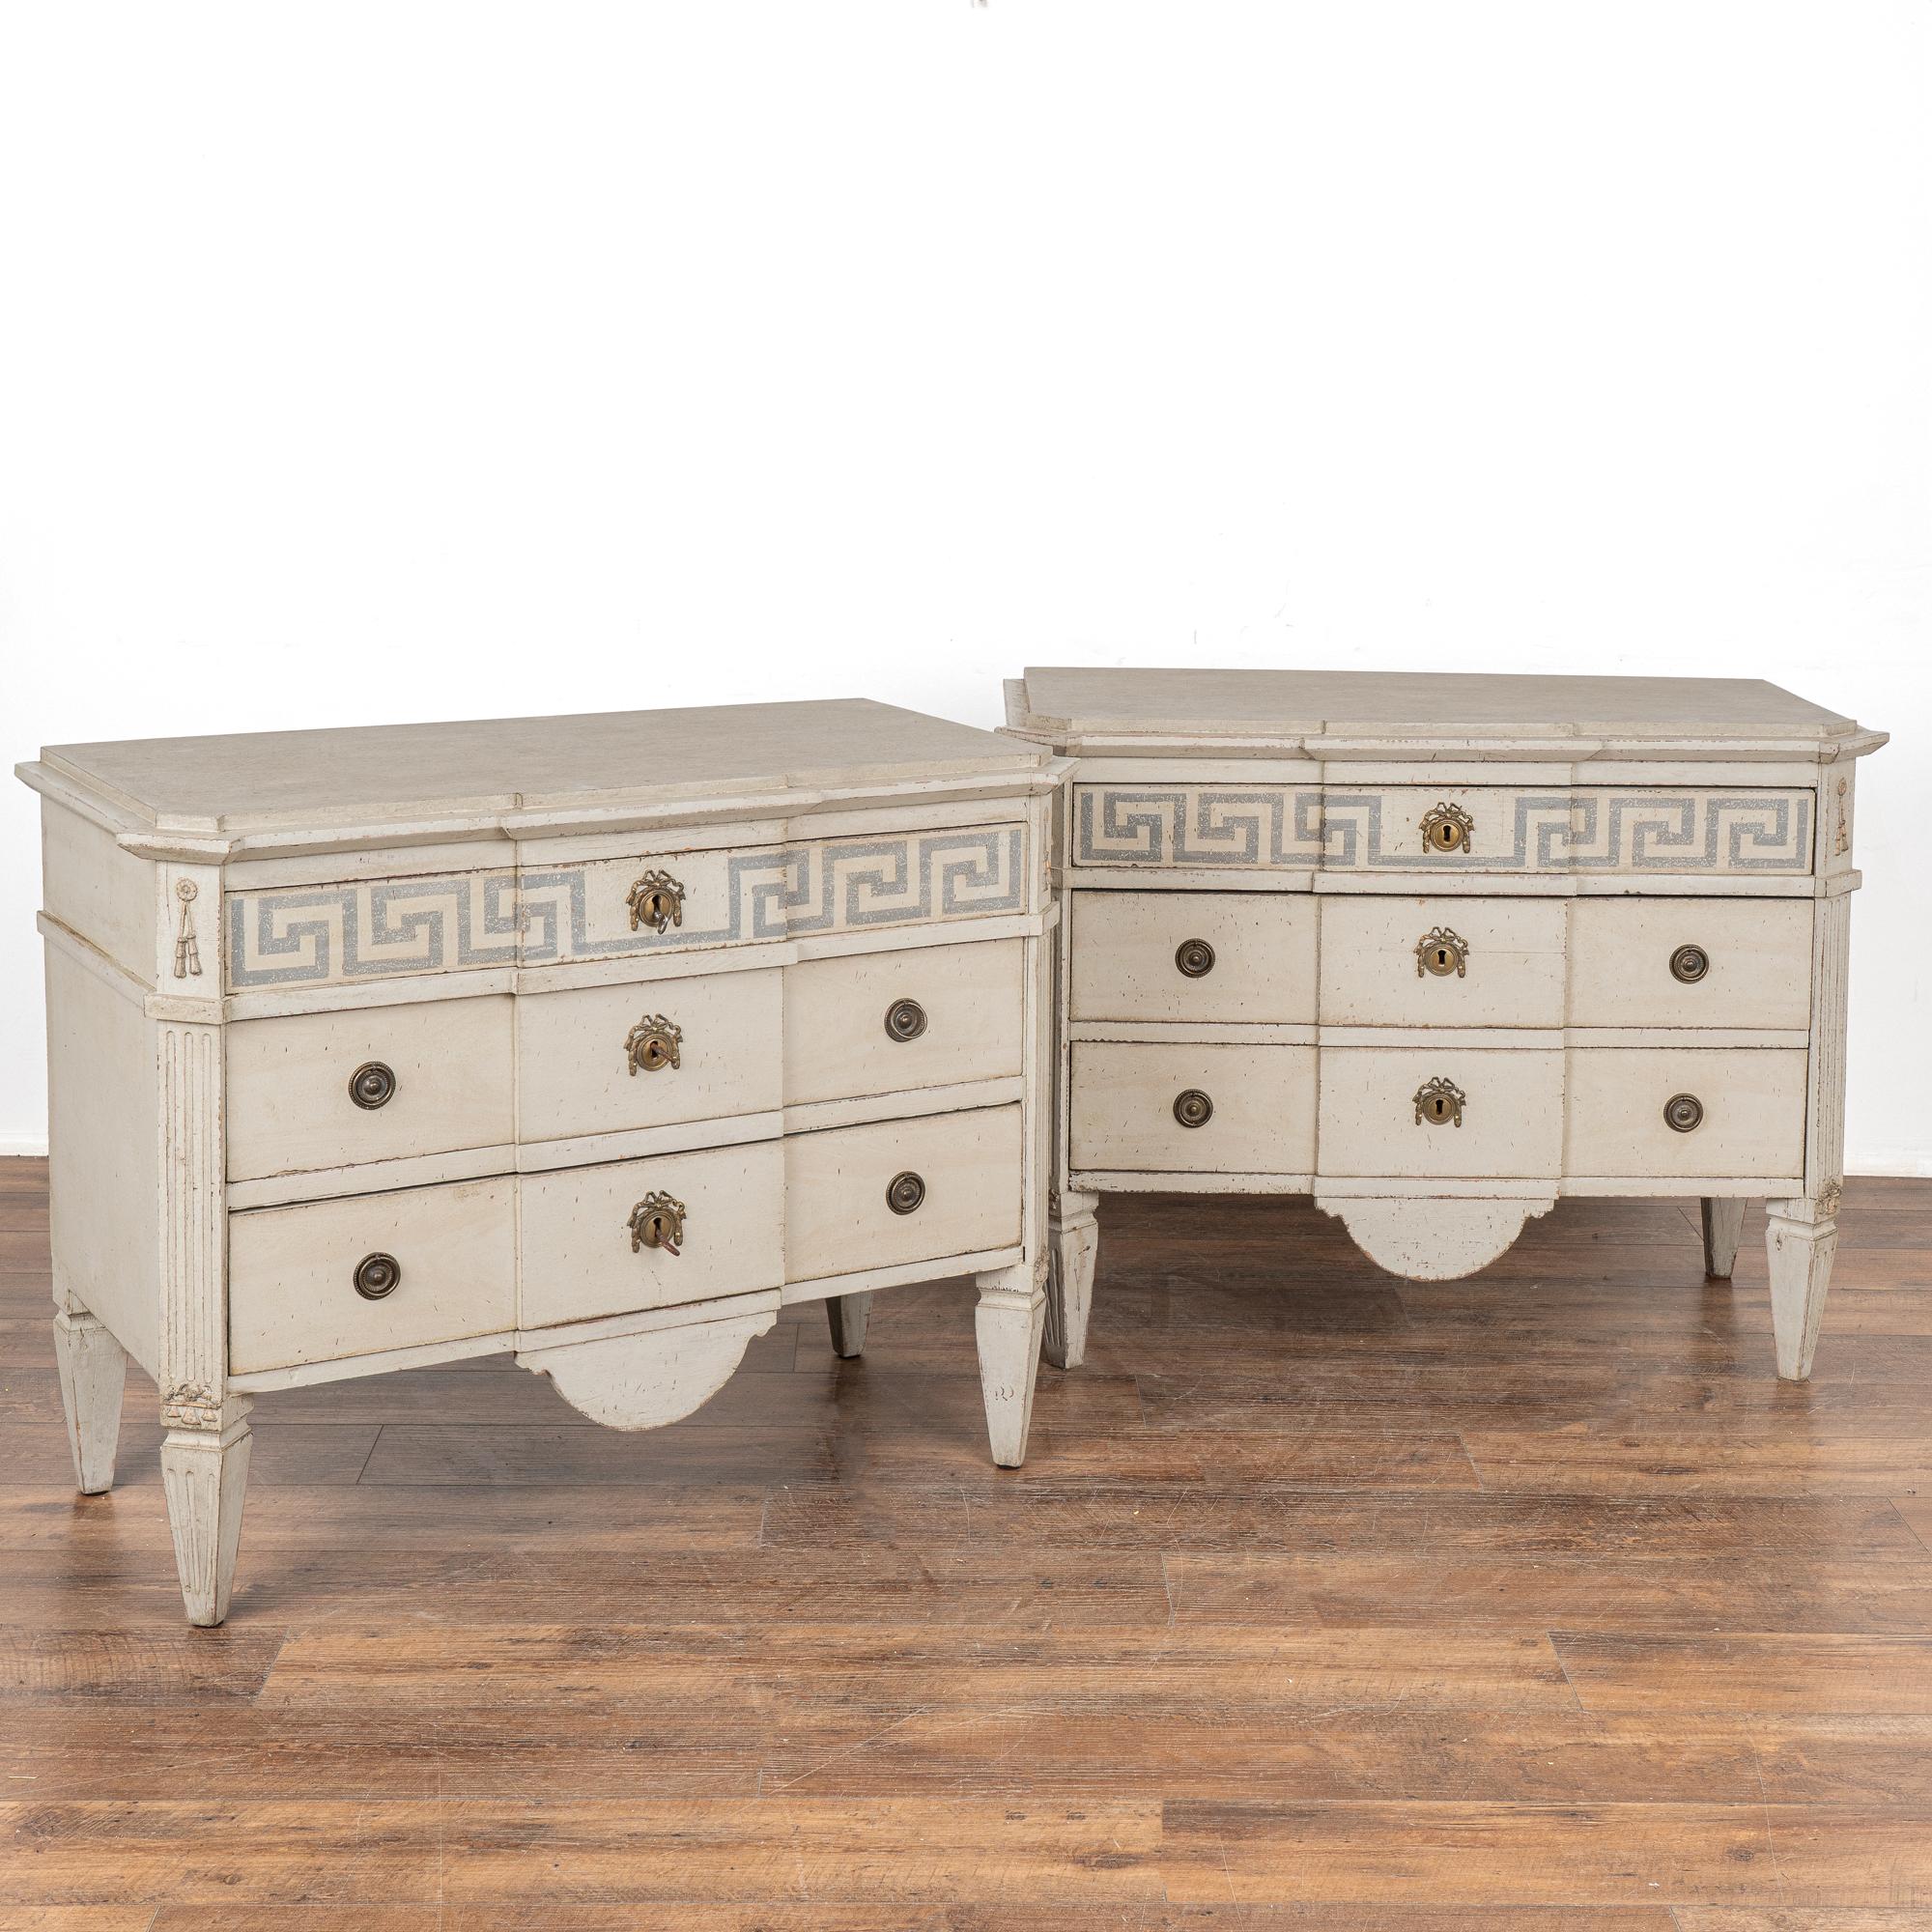 A pair of decorative Gustavian pine chest of drawers with Greek key motif painted along upper drawer.
Canted fluted side posts topped with carved applied tassels resting on four tapered feet.
The newer, professionally applied antique white custom